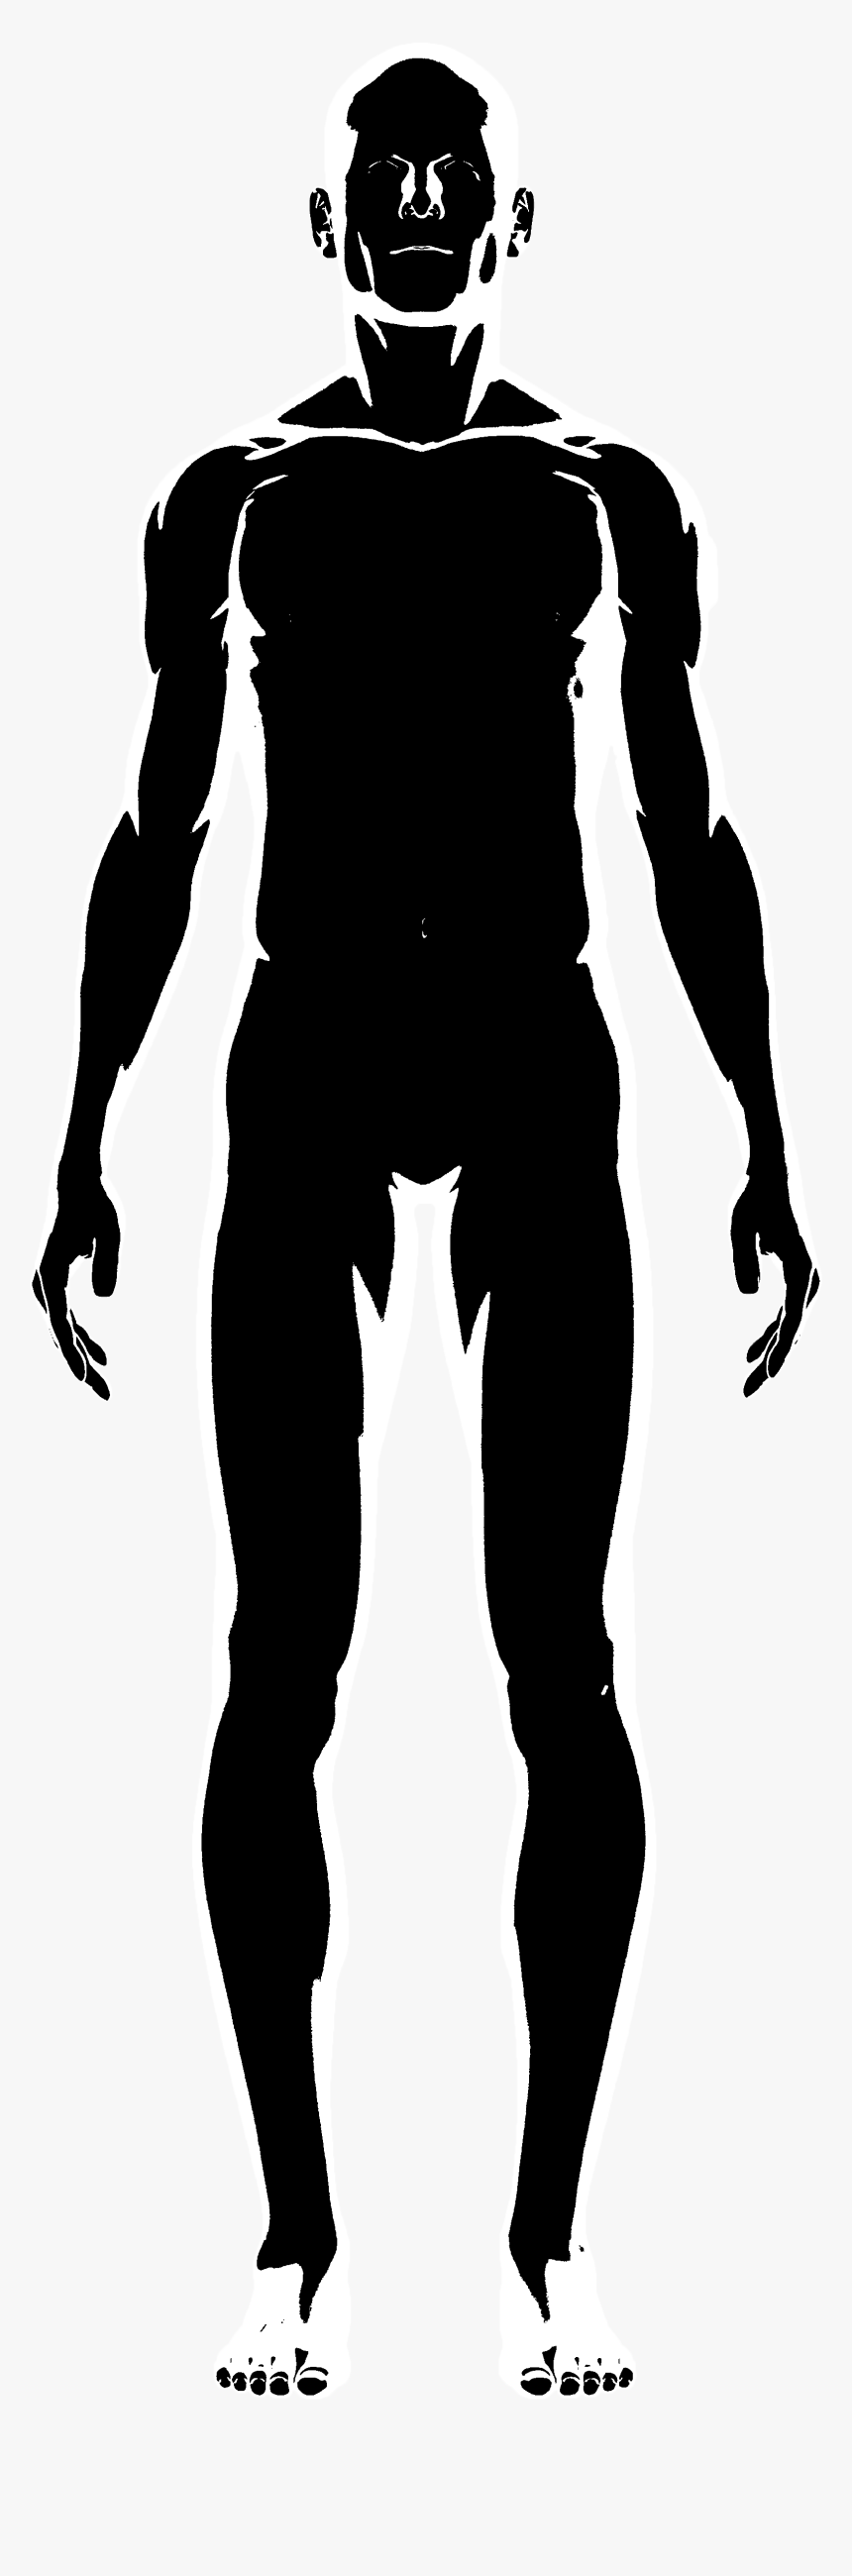 https://www.kindpng.com/picc/m/122-1226867_silhouette-man-vector-graphics-royalty-free-illustration-vector.png